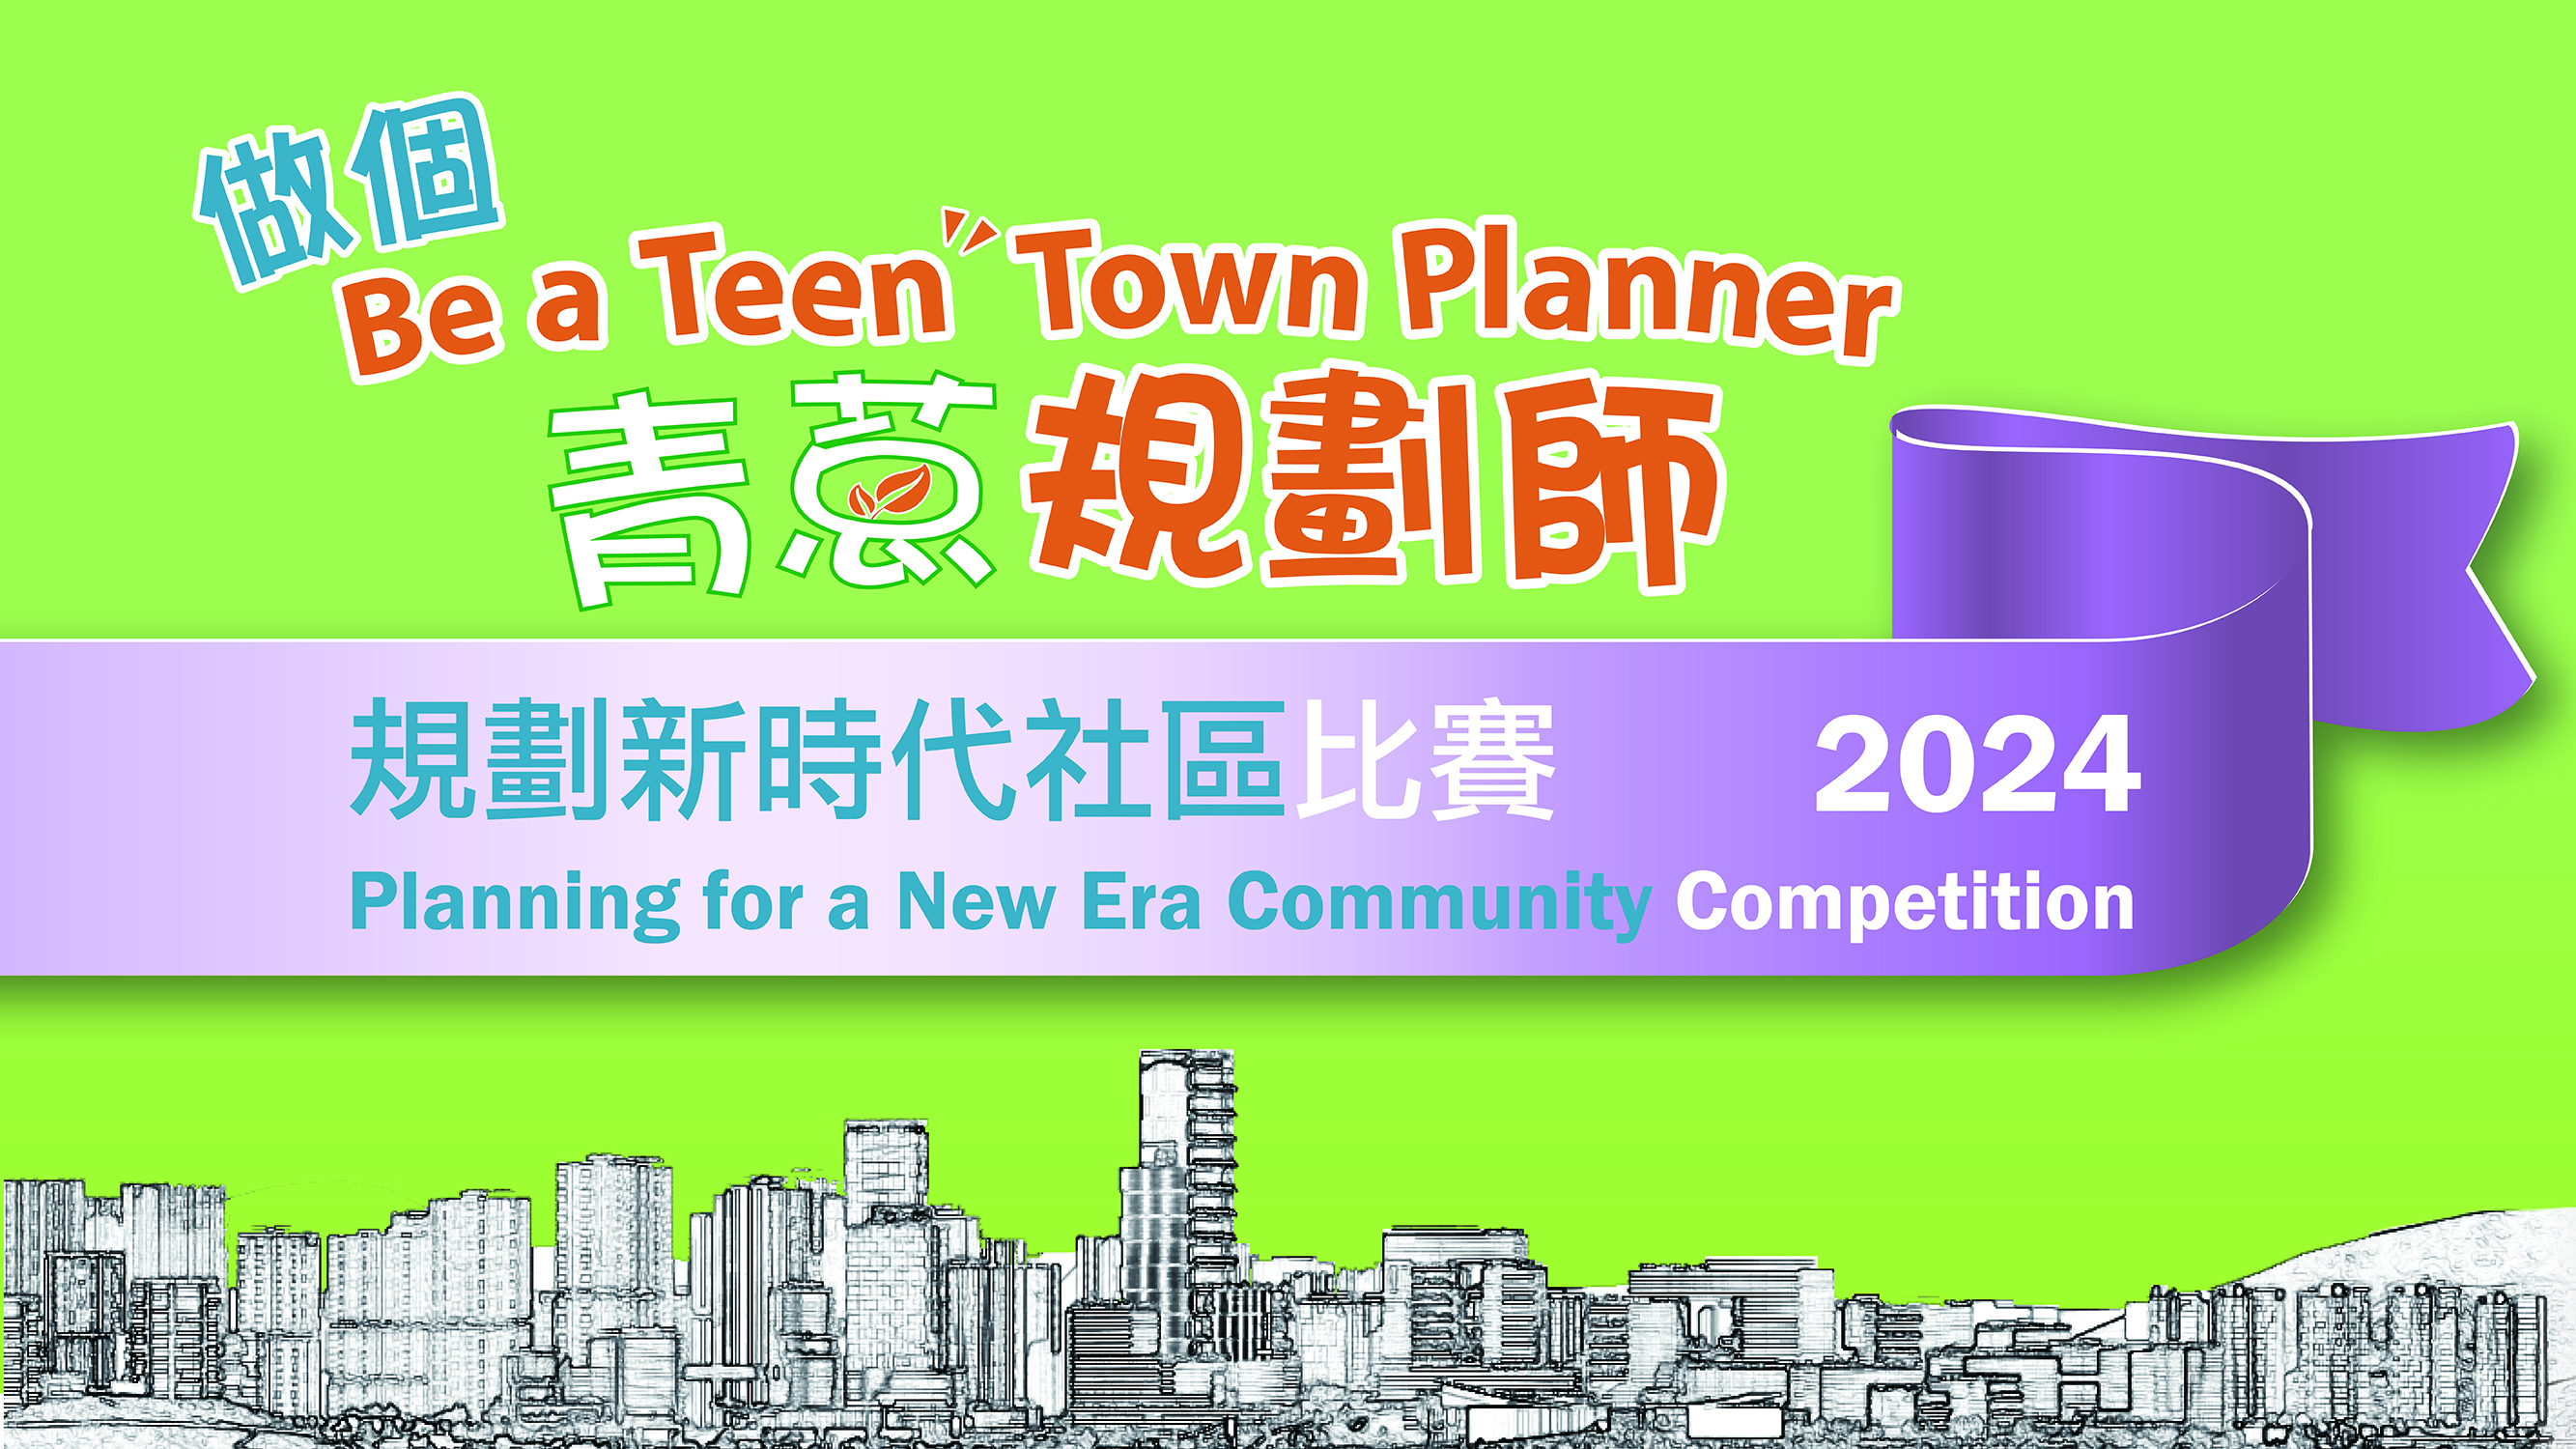 "Be a Teen Town Planner – Planning for a New Era Community" Competition 2024